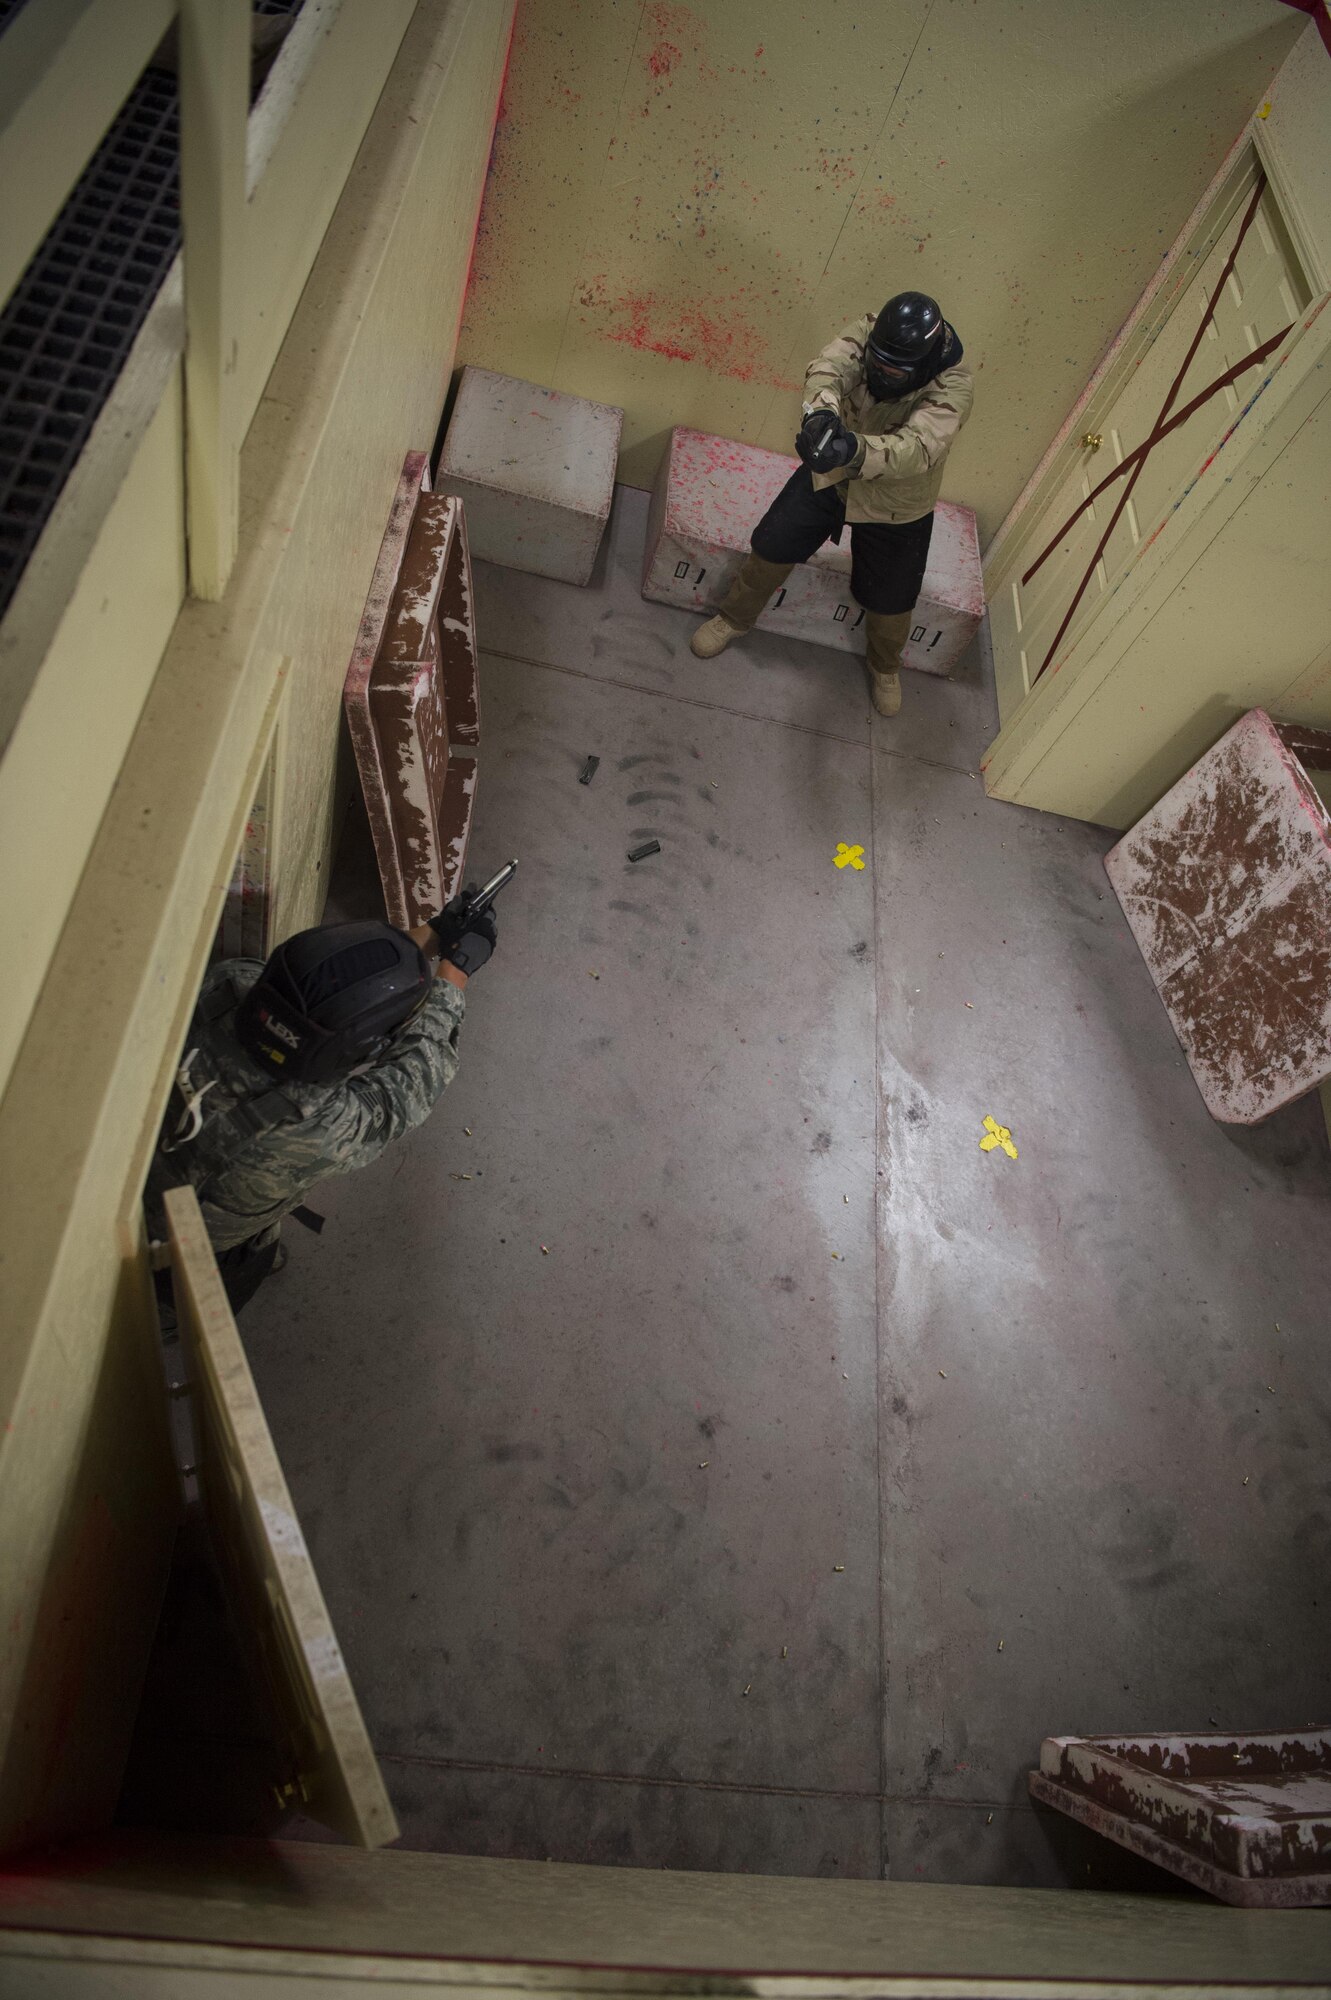 A security forces member with the 28th Security Forces Squadron from Ellsworth Air Force Base, S.D., enters a room to engage an enemy target during the 2017 Global Strike Challenge at Camp Guernsey, Wyo., May 18, 2017. Defenders were tested on marksmanship, navigation, self-aid buddy care and tactics throughout the week-long security forces portion of the competition. (U.S. Air Force photo by Staff Sgt. Christopher Ruano)